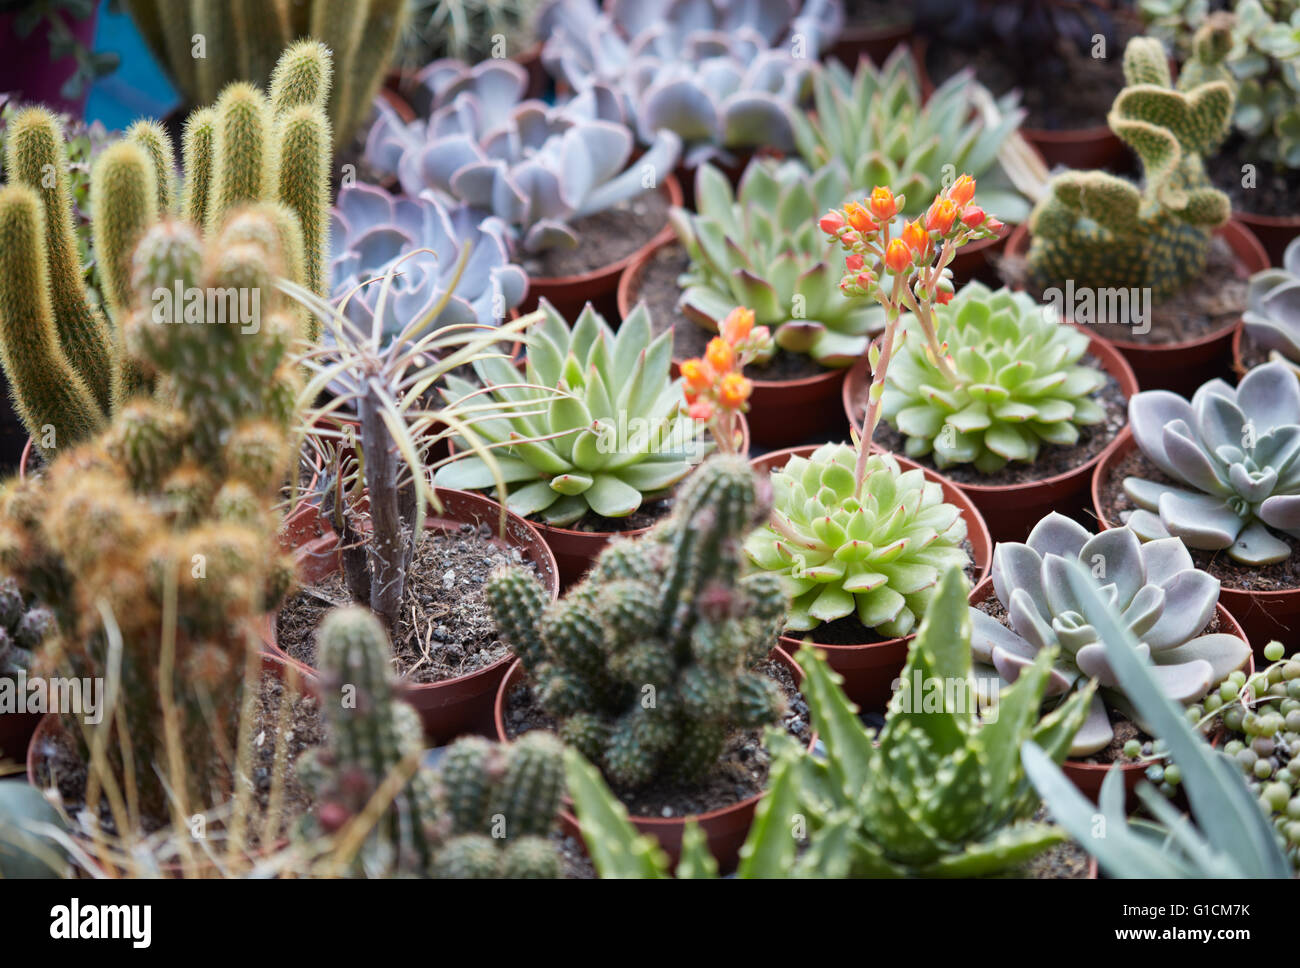 Succulent plants collection in small pots Stock Photo